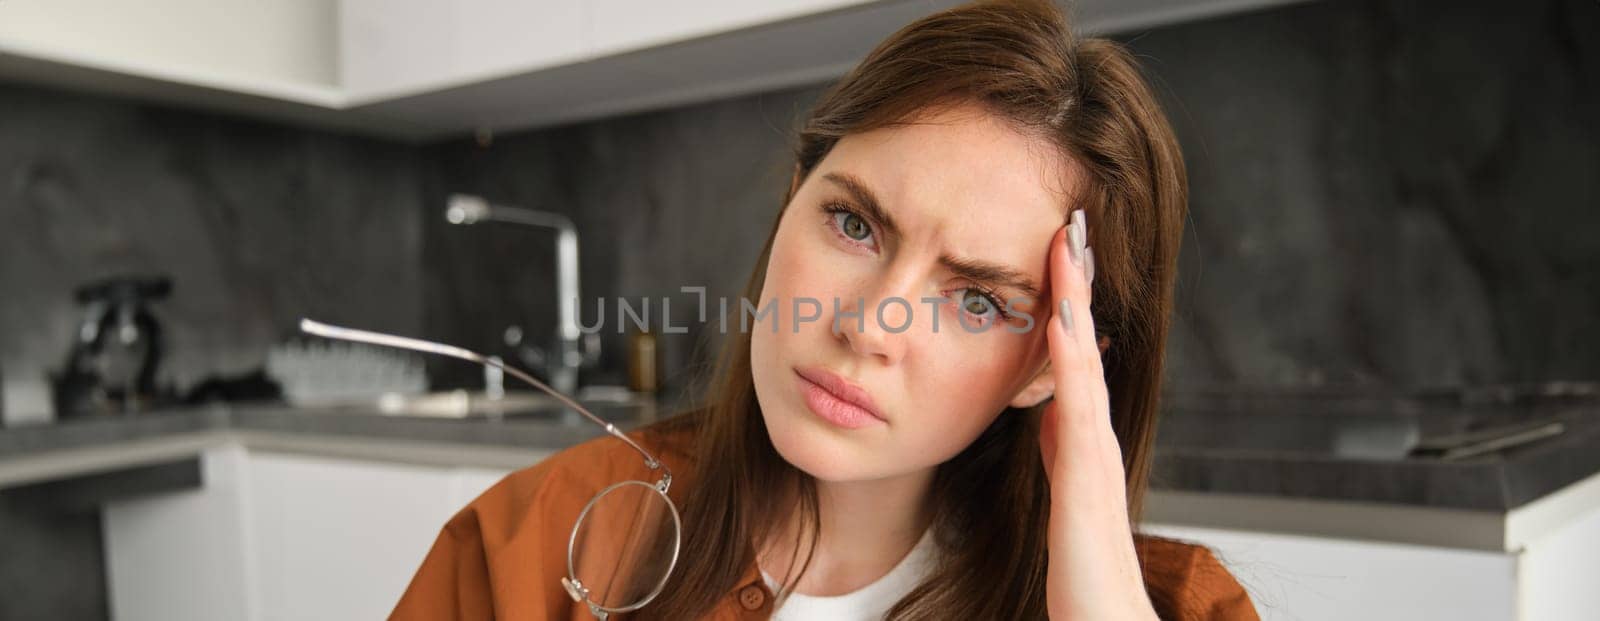 Close up portrait of woman frowning, touching head from painful feeling, has headache or migraine, troubled with something, sitting in kitchen.